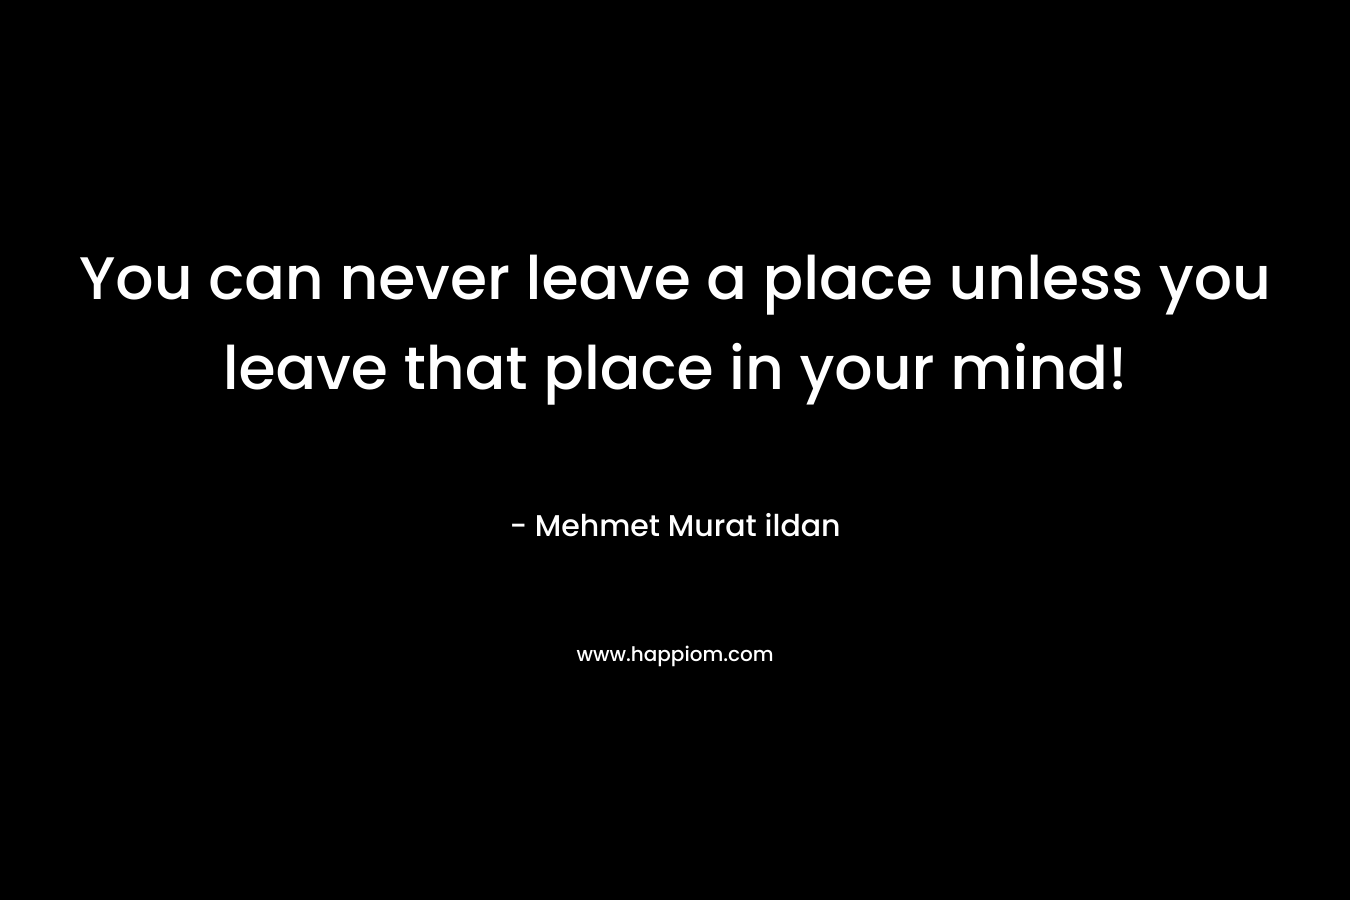 You can never leave a place unless you leave that place in your mind!